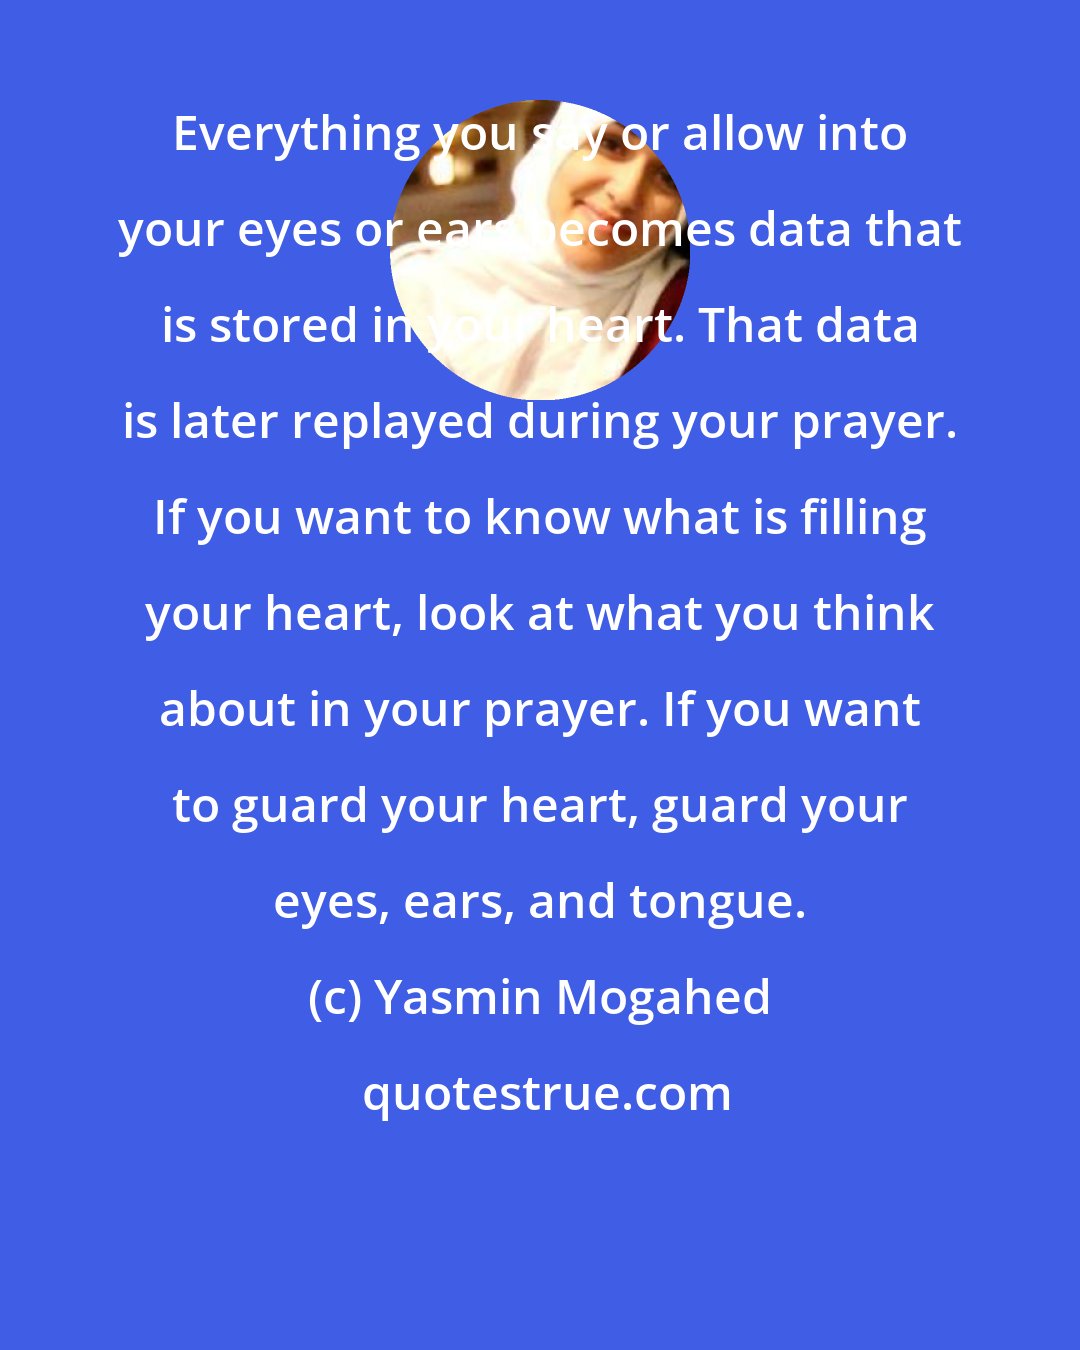 Yasmin Mogahed: Everything you say or allow into your eyes or ears becomes data that is stored in your heart. That data is later replayed during your prayer. If you want to know what is filling your heart, look at what you think about in your prayer. If you want to guard your heart, guard your eyes, ears, and tongue.